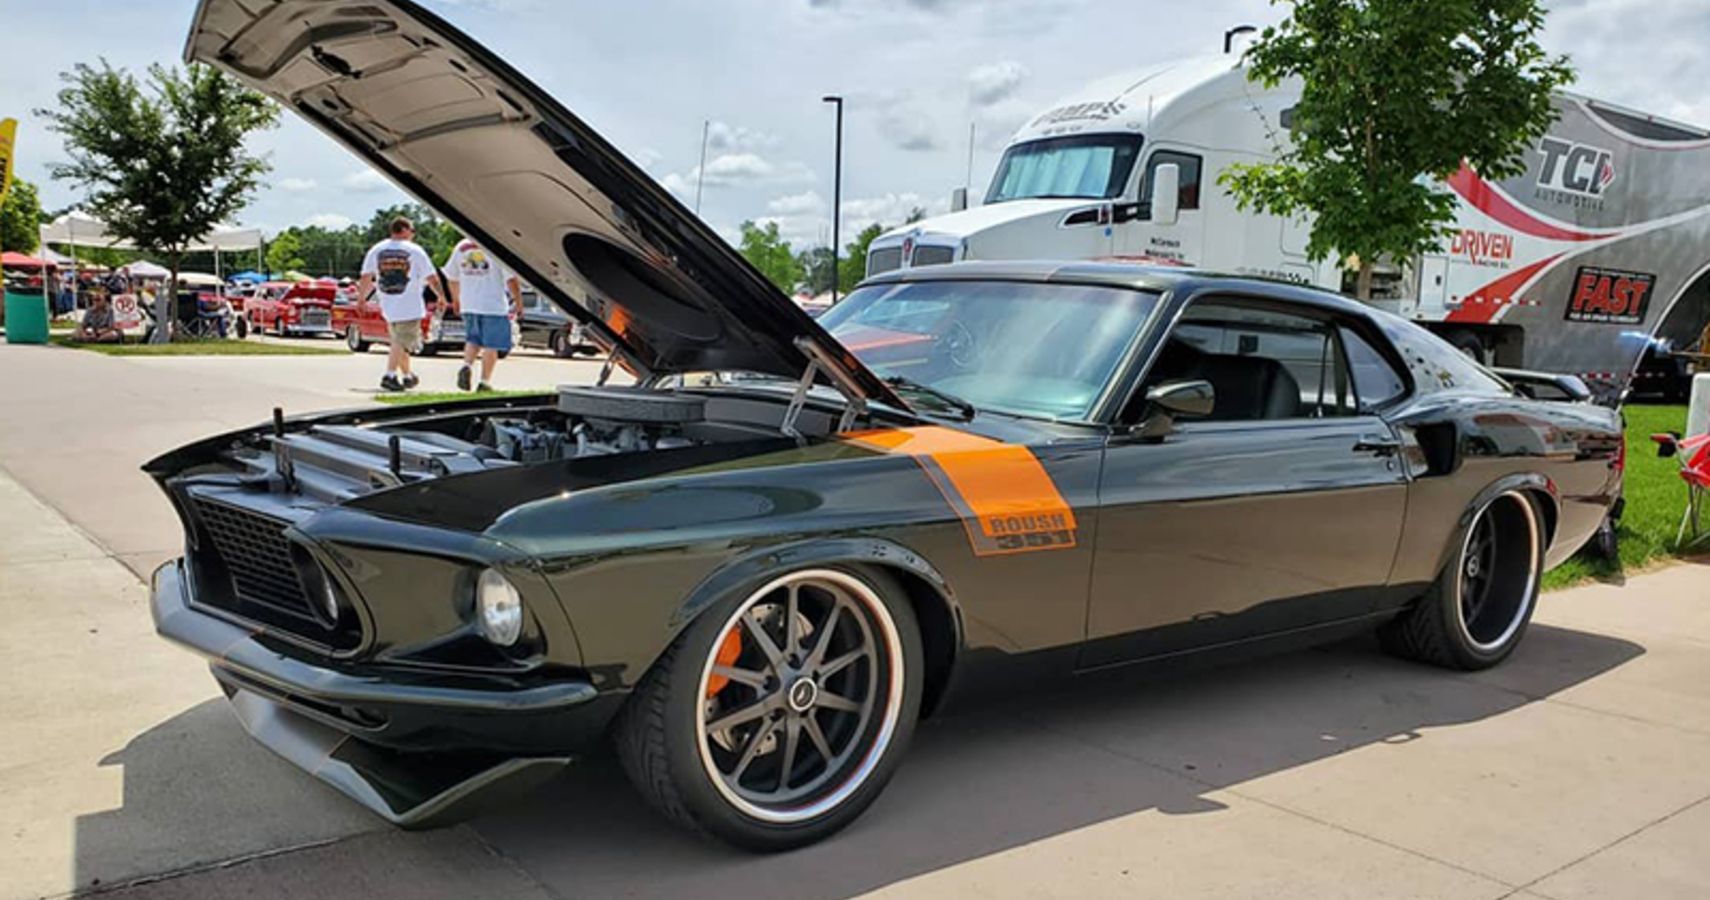 1969 Mustang Mach 1 Impresses With Ex-Roush Racing 351C Engine